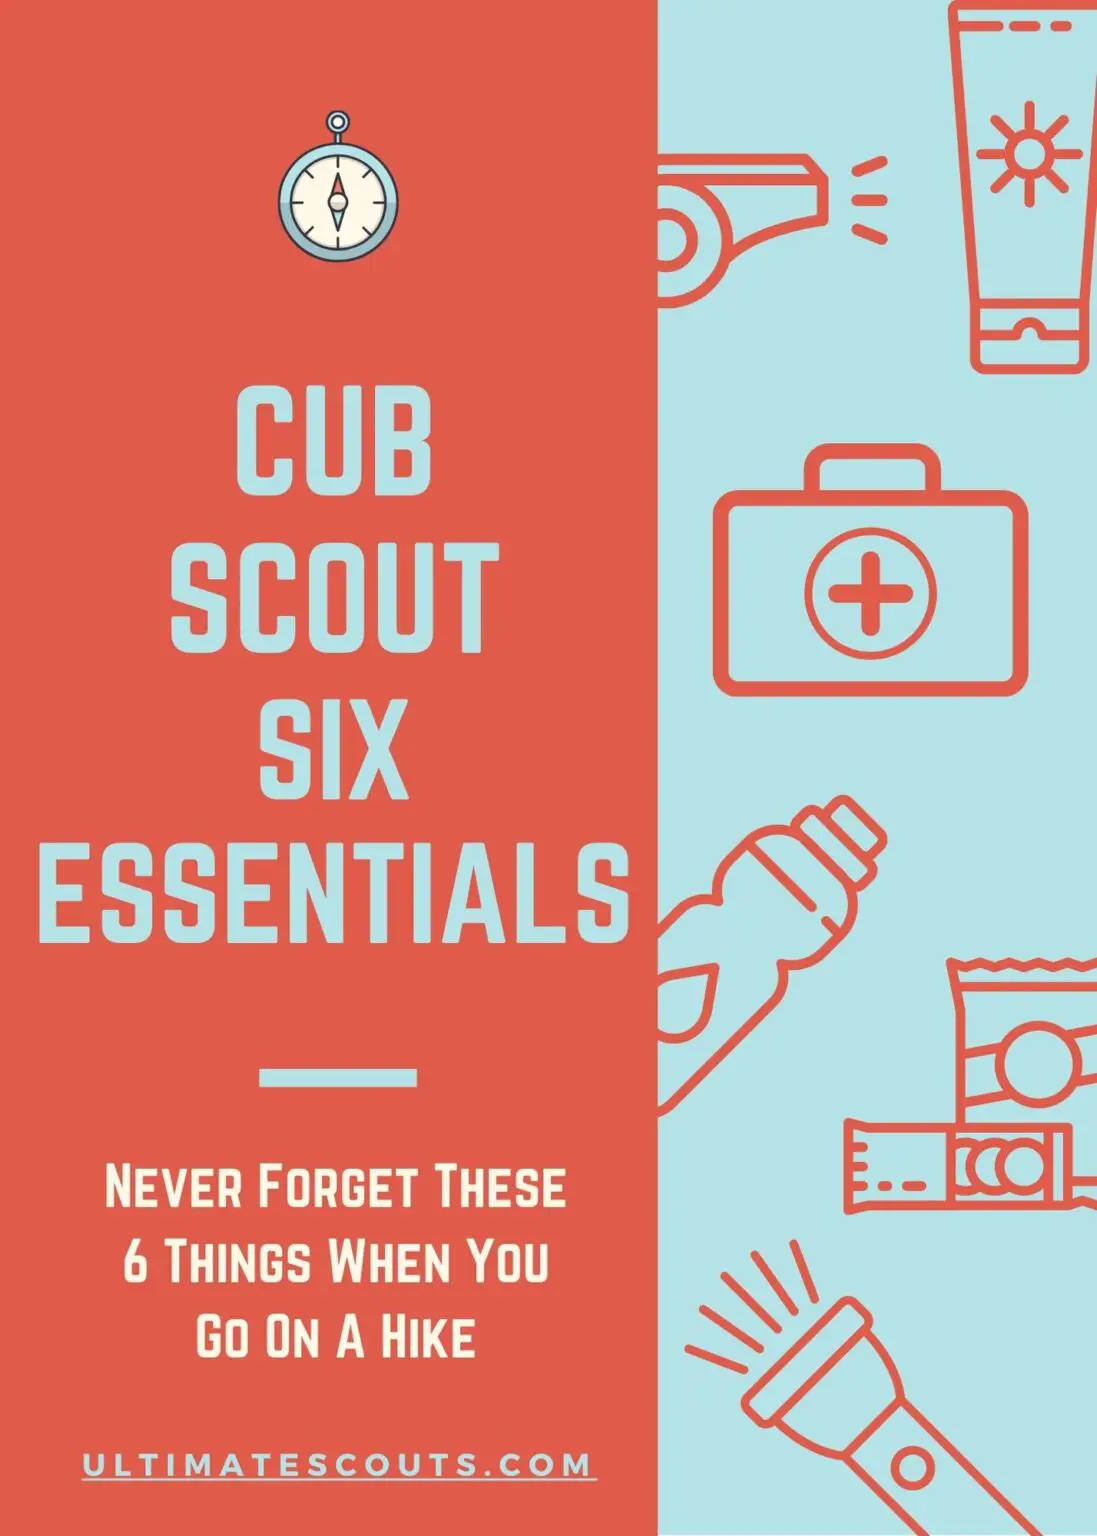 What Are The Cub Scout 6 Essentials? Ultimate Scouts